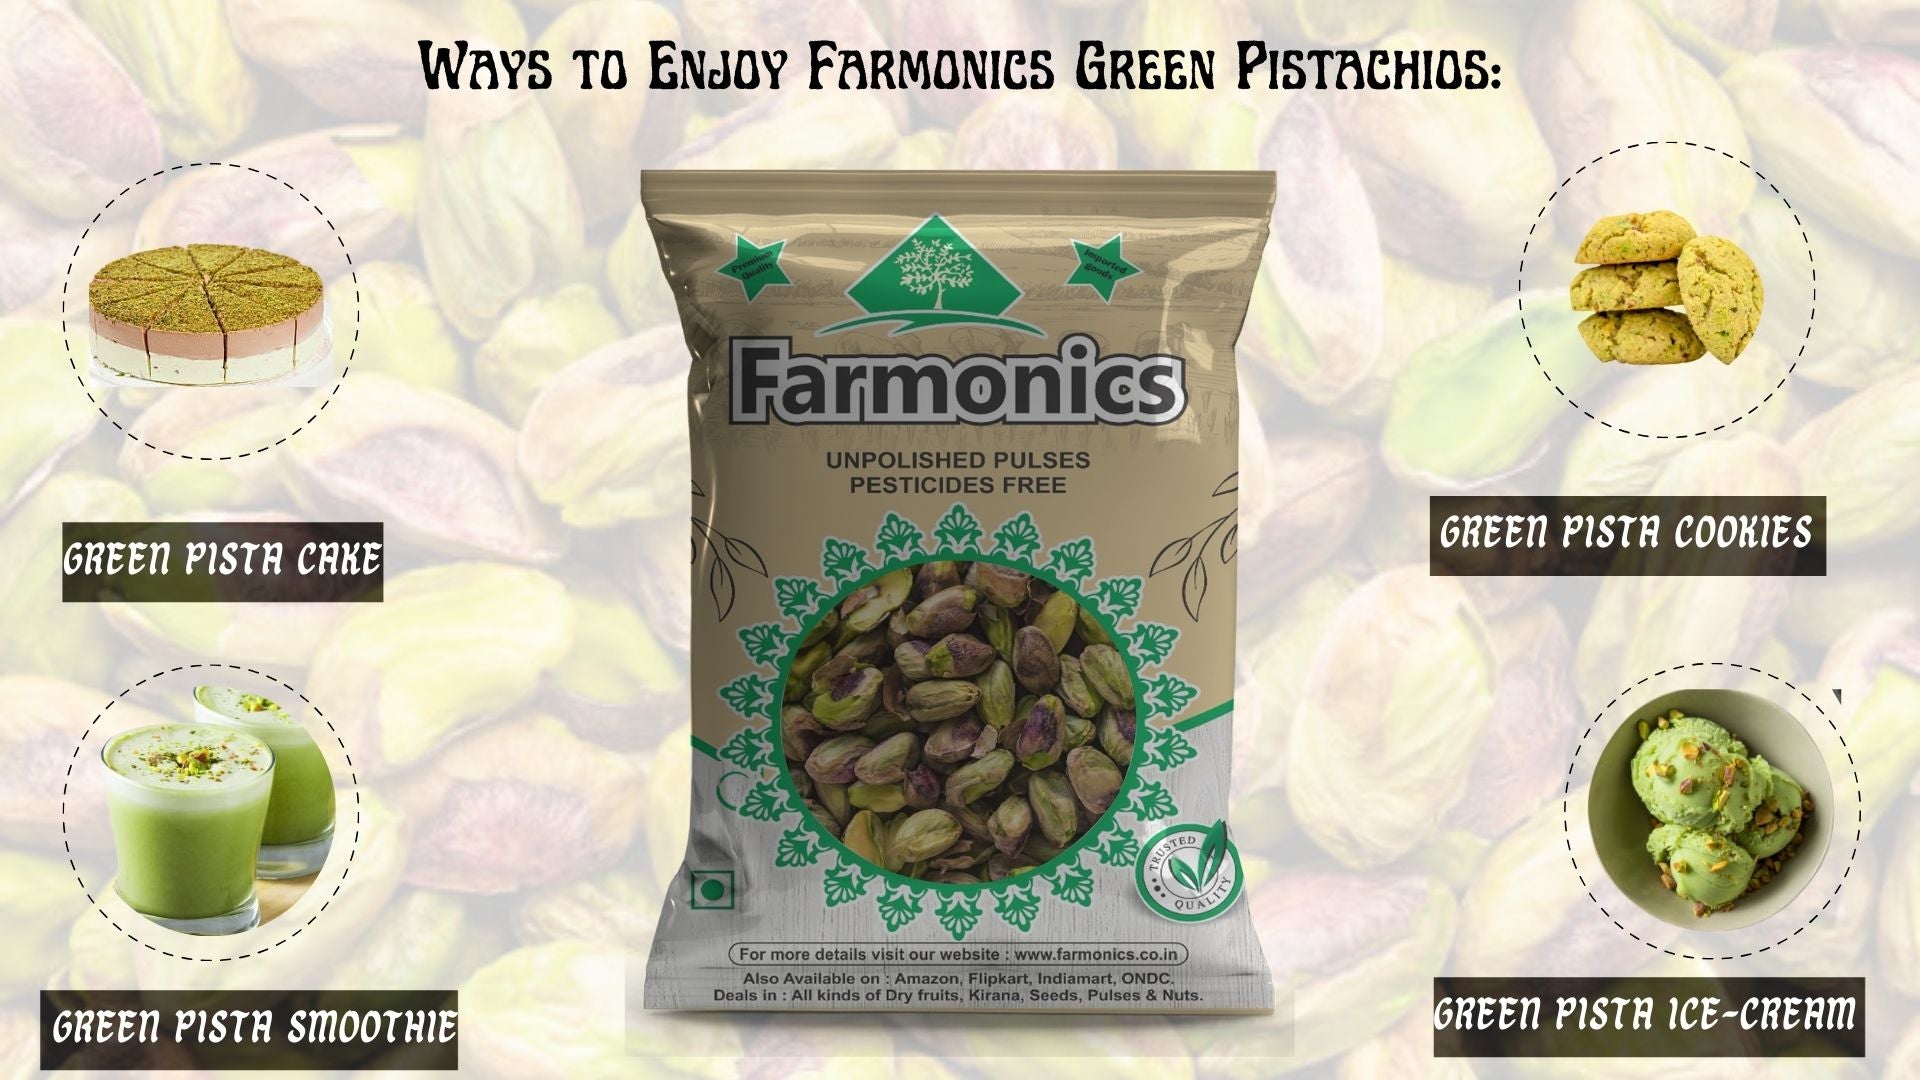 here are some of the ways you can enjoy farmonics green pista